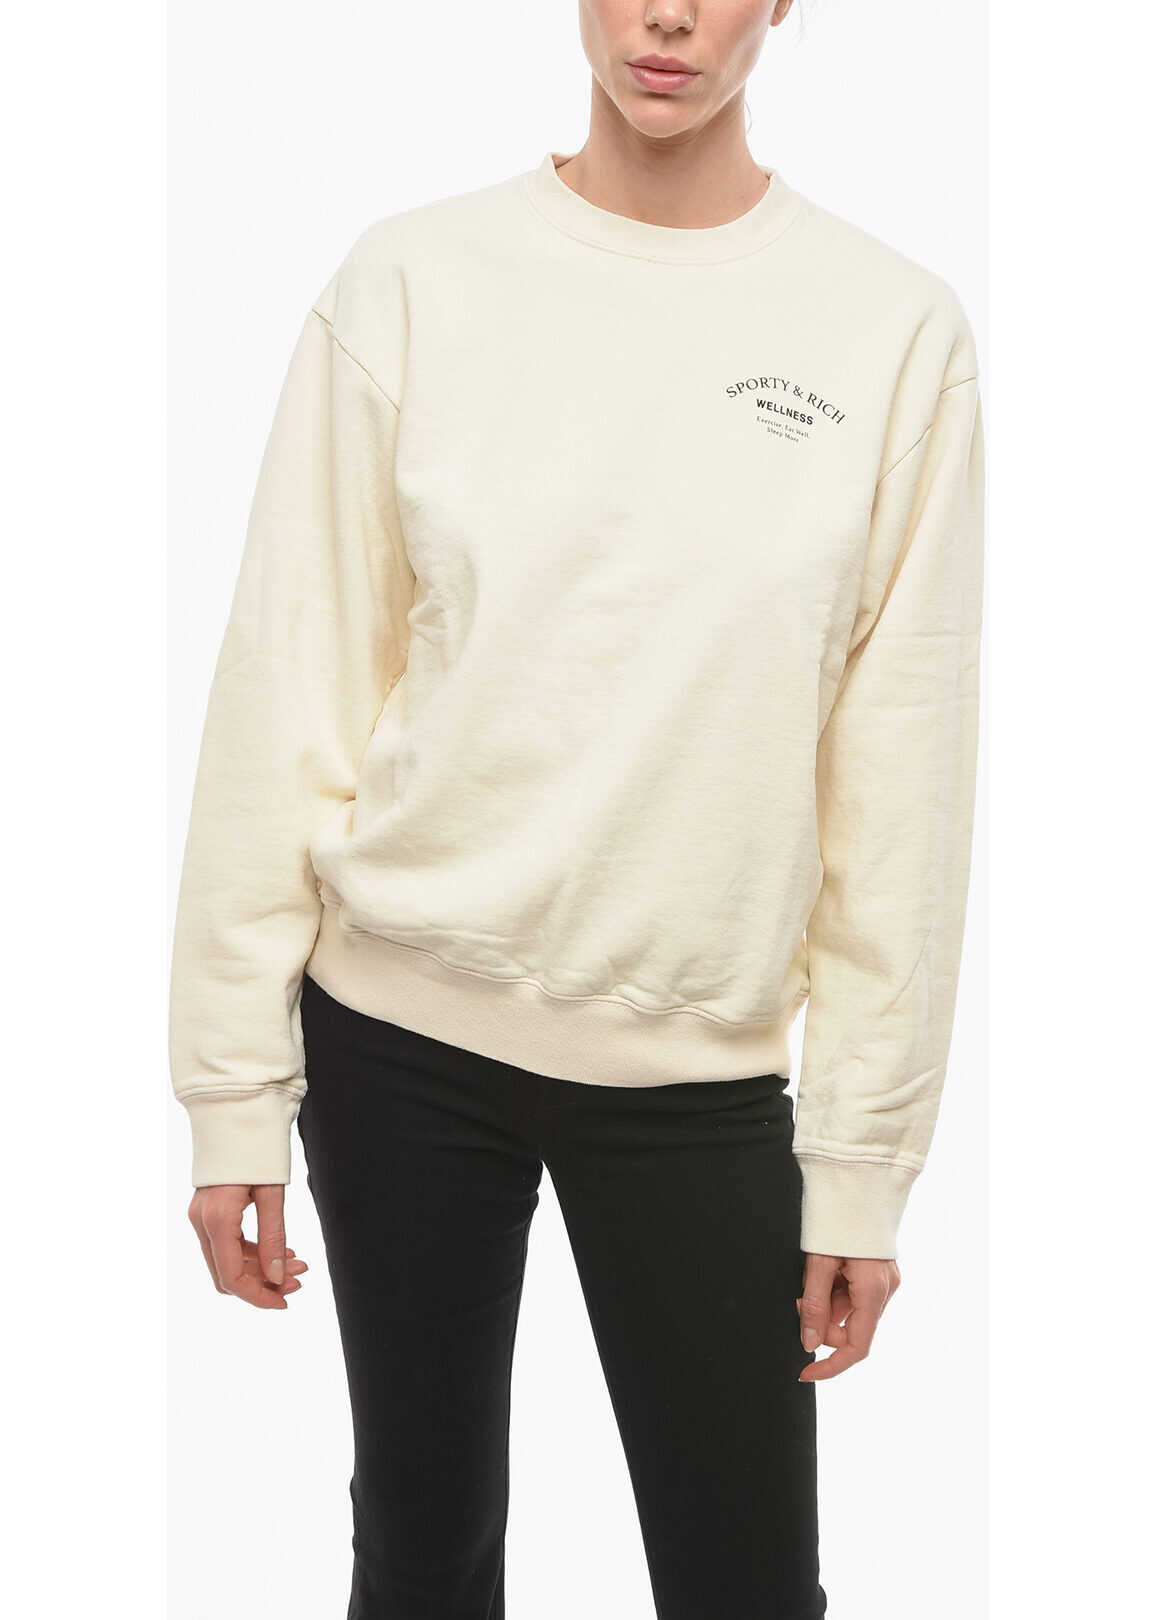 SPORTY & RICH Solid Color Crew-Neck Sweatshirt With Printed Contrasting Lo White